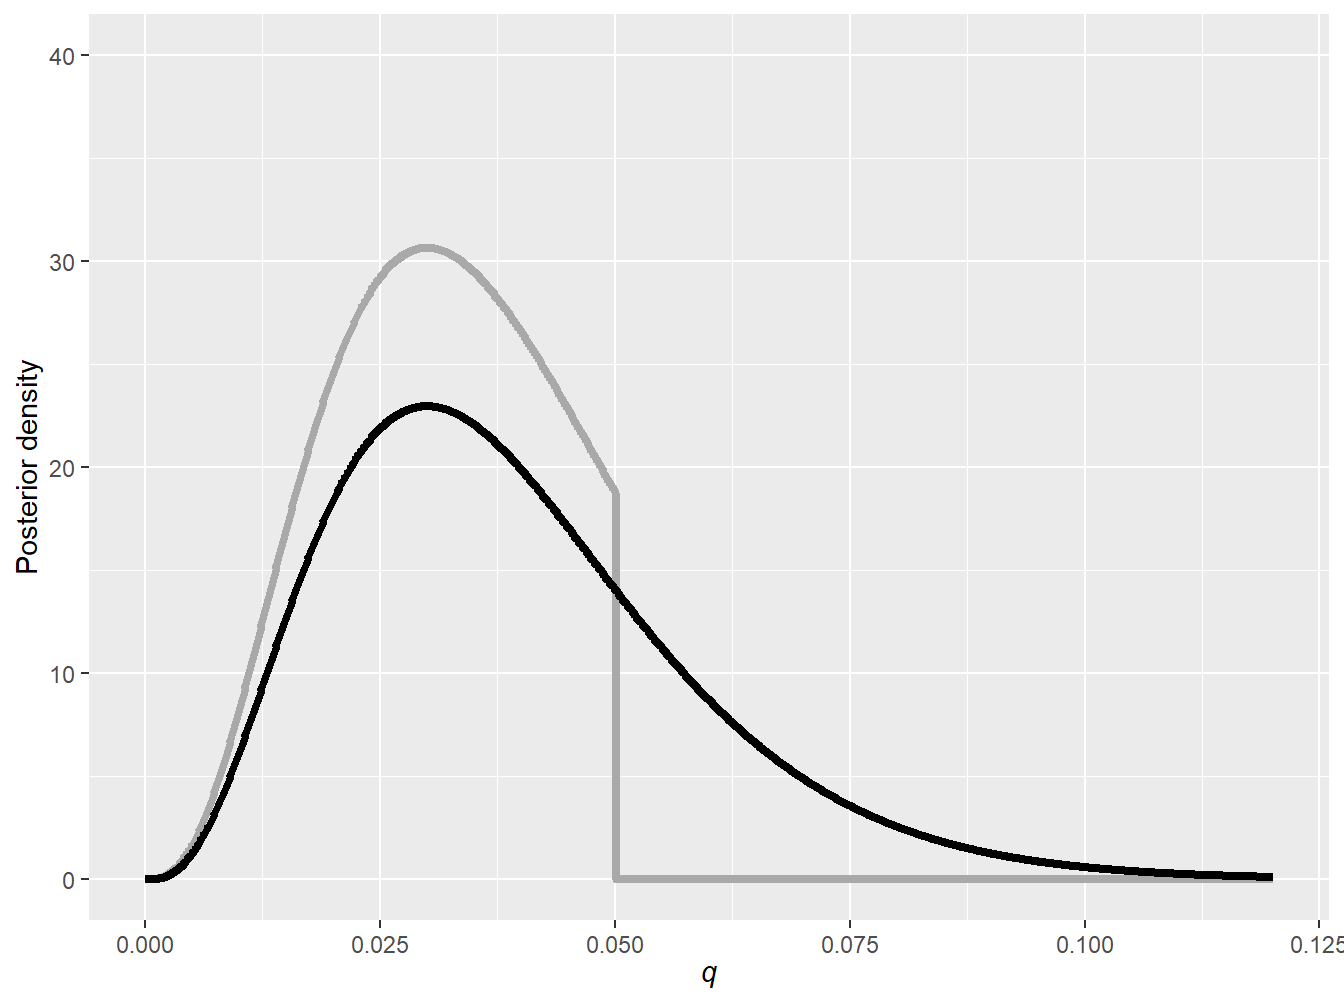 Posterior densities based on informative (gray) and noninformative priors (black)